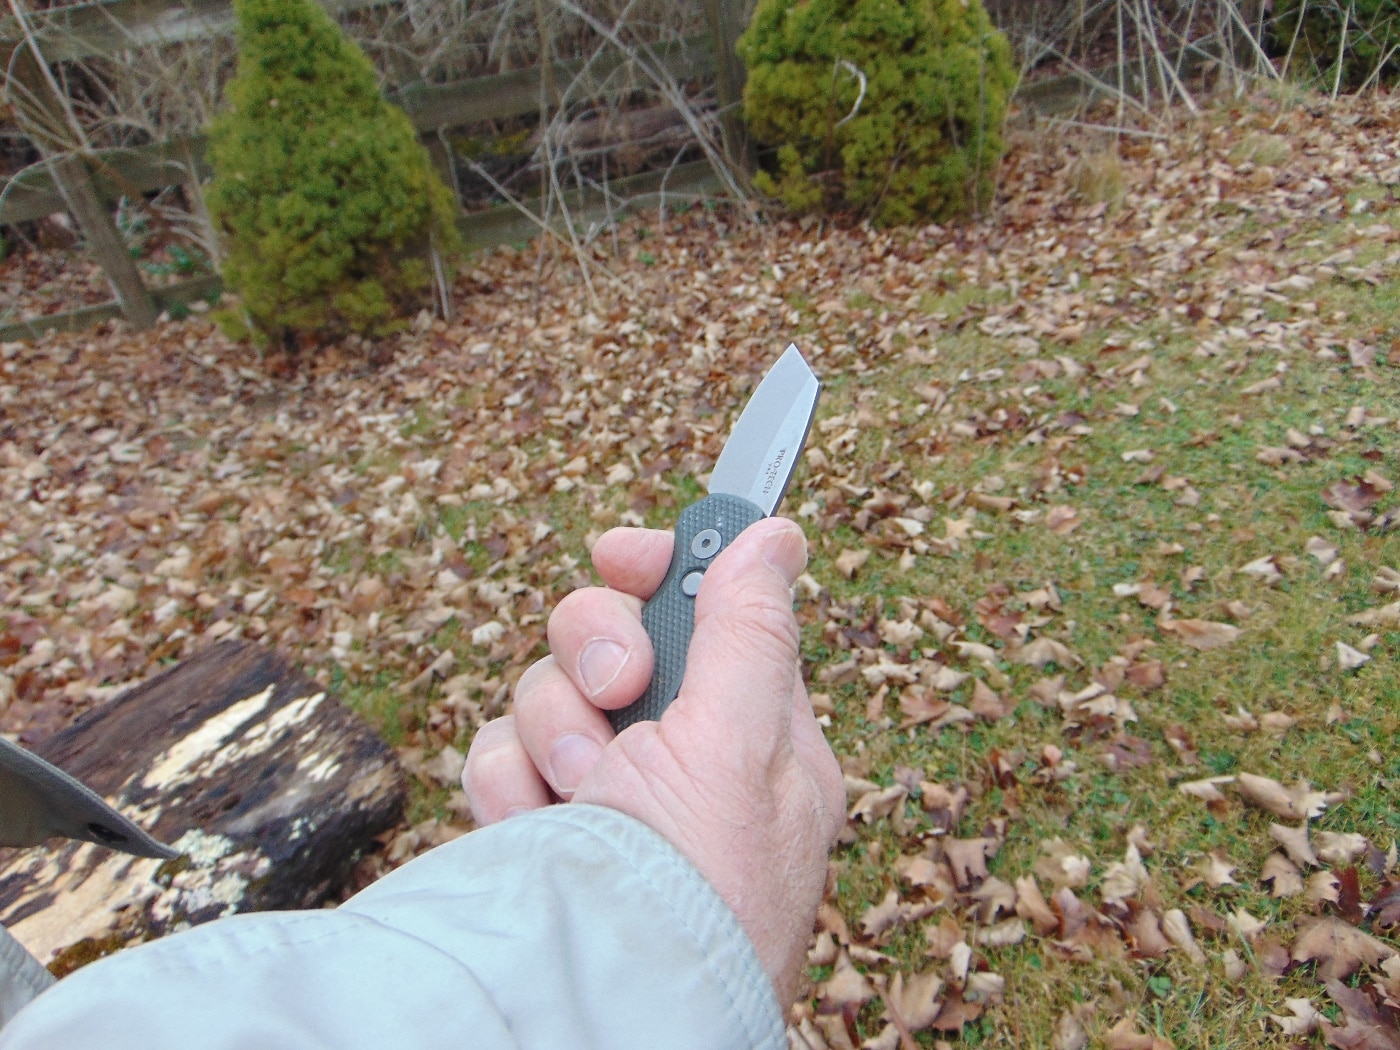 In this photo, the author is showing how to handle the Runt 5 knife. Note his thumb on the spine of the blade where one would expect jimping. This allows you to put force behind the cutting motion. Combines with the Wharnecliffe design, this provides exceptional cutting power at the tip.